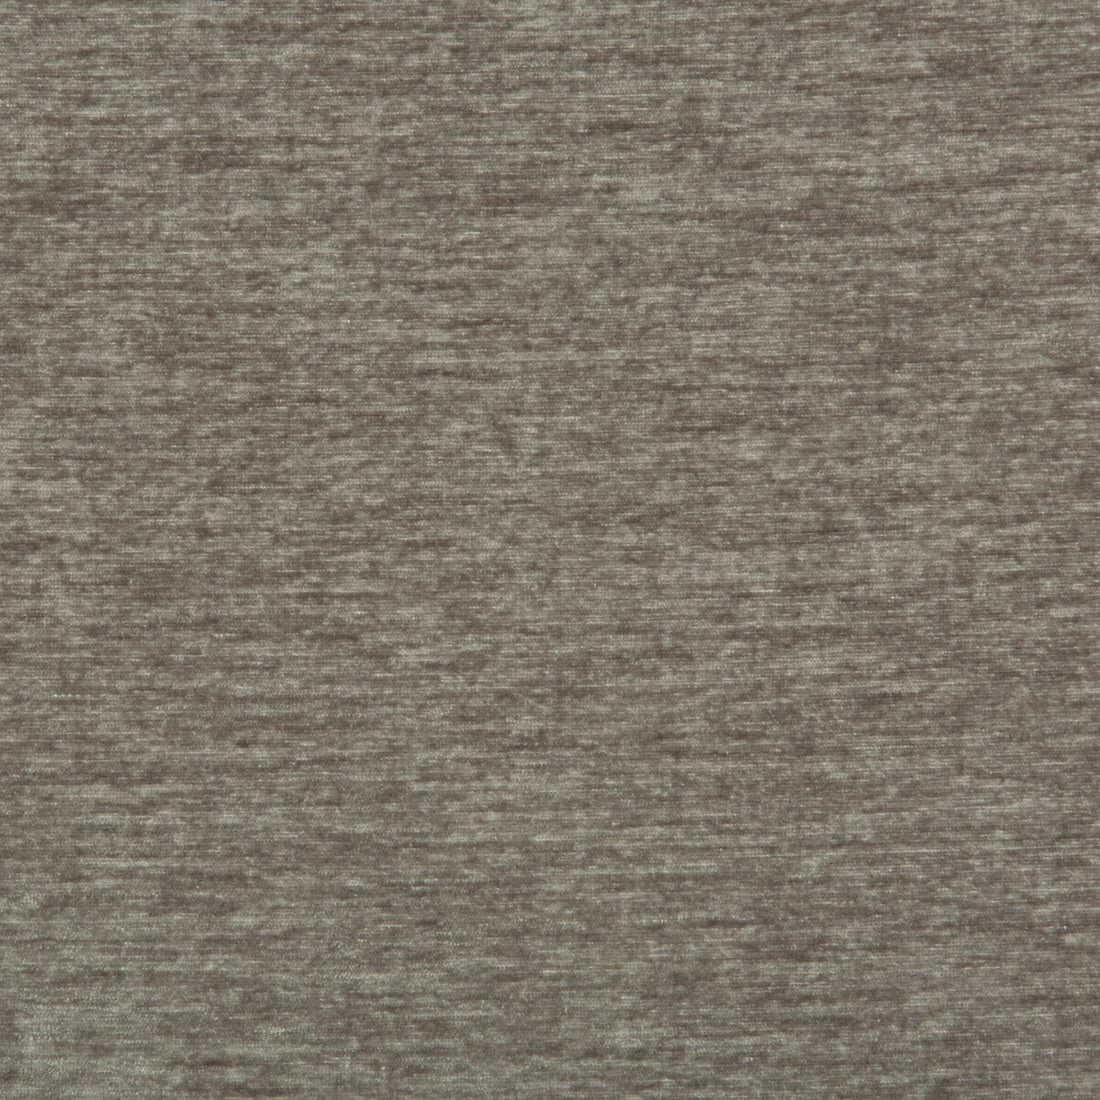 Kravet Smart fabric in 35392-11 color - pattern 35392.11.0 - by Kravet Smart in the Performance Crypton Home collection